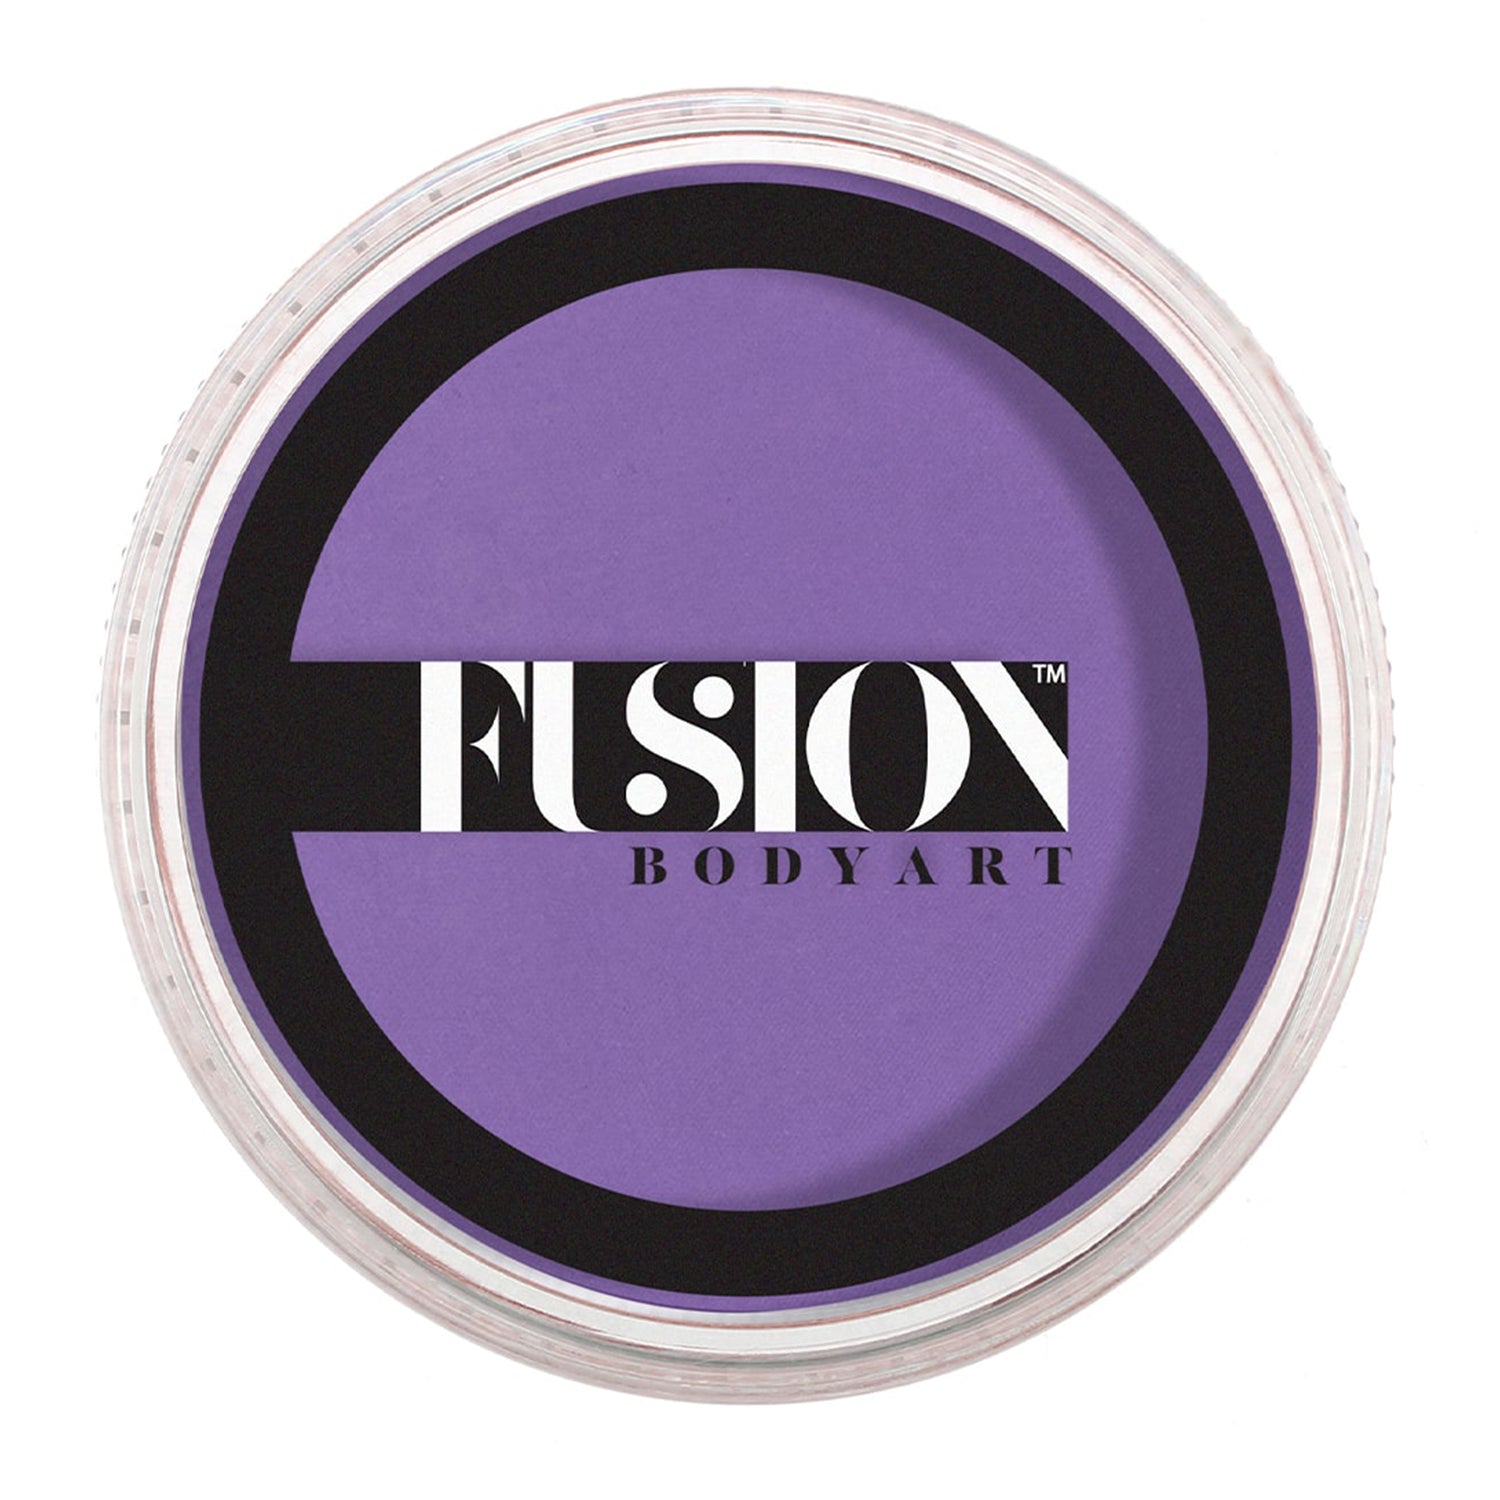 Fusion Body Art Face & Body Paint - Prime Lovely Lilac